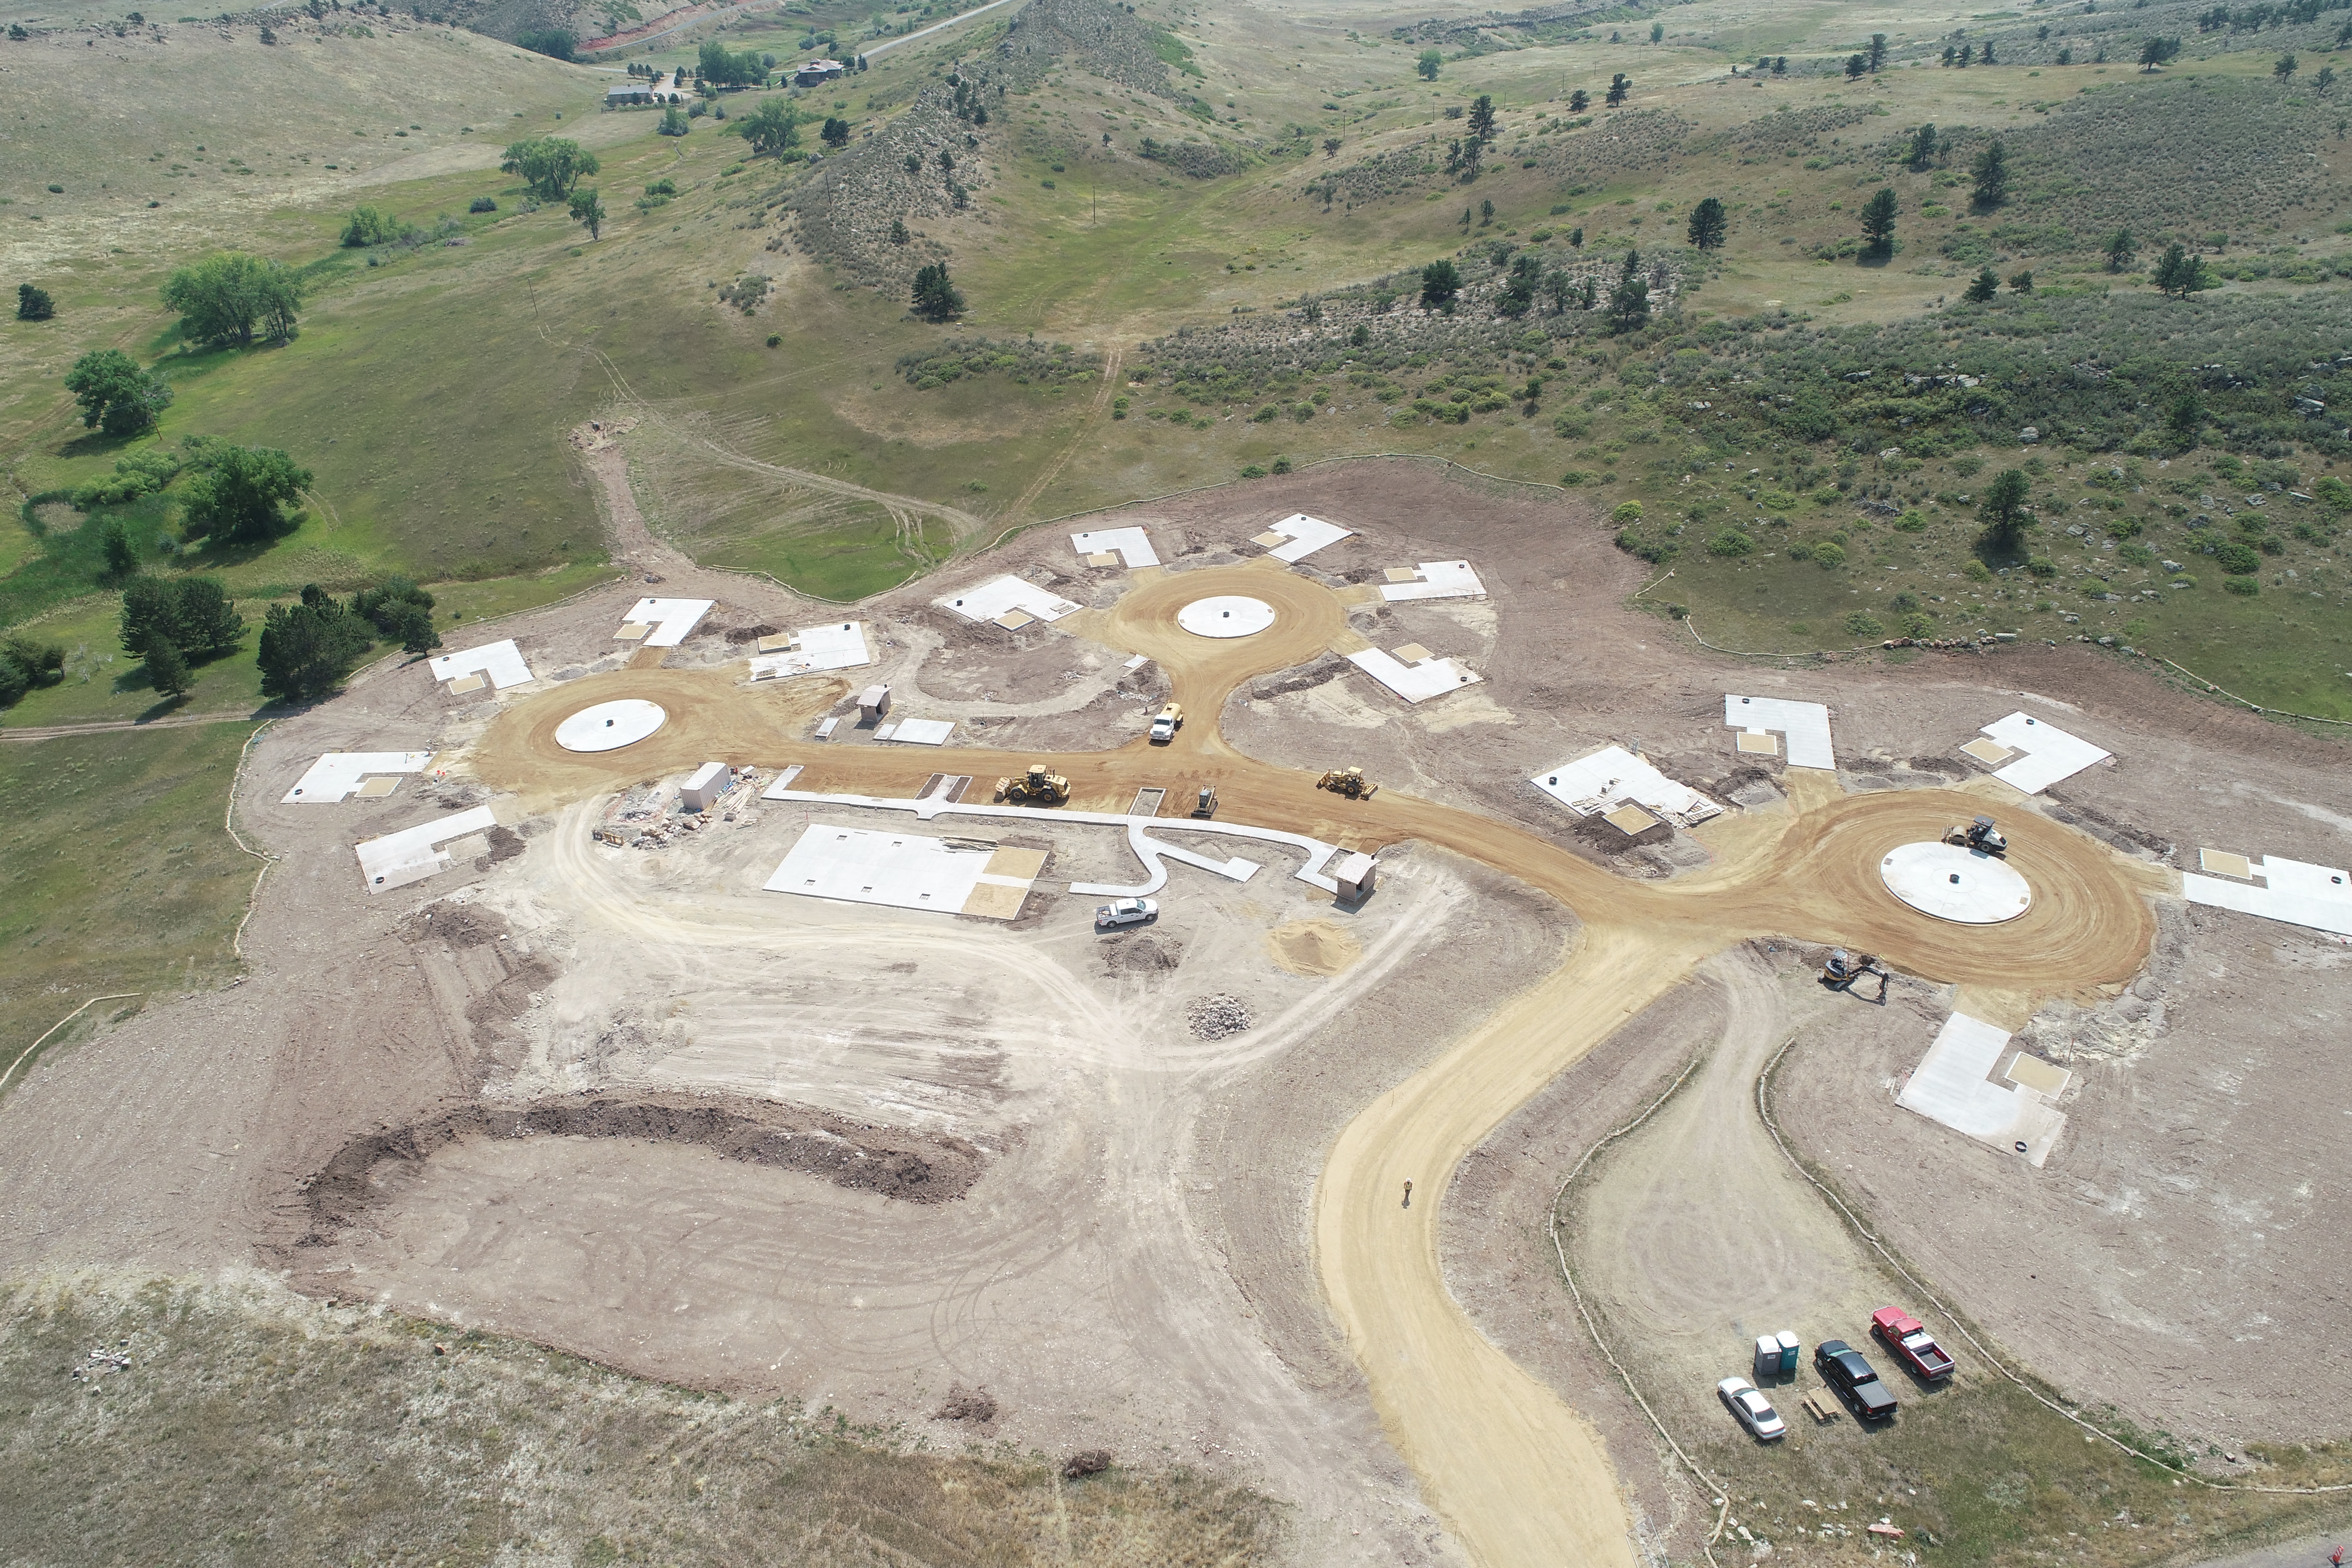 Image 2: Site view of construction at Sky View Campground